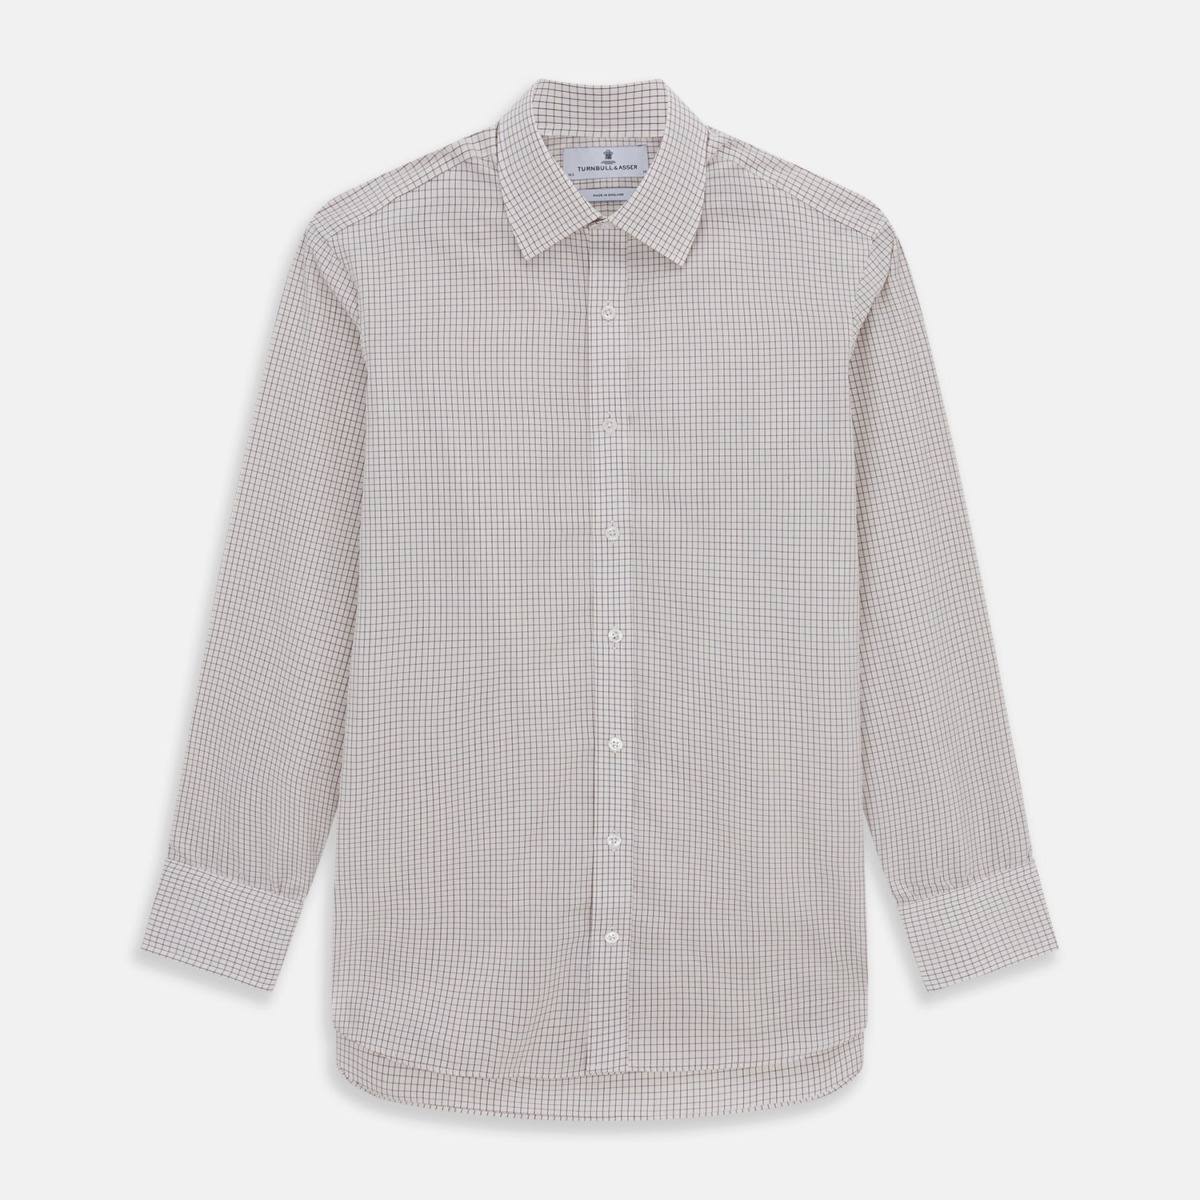 Checked Shirt for Man by Turnbull And Asser GOOFASH